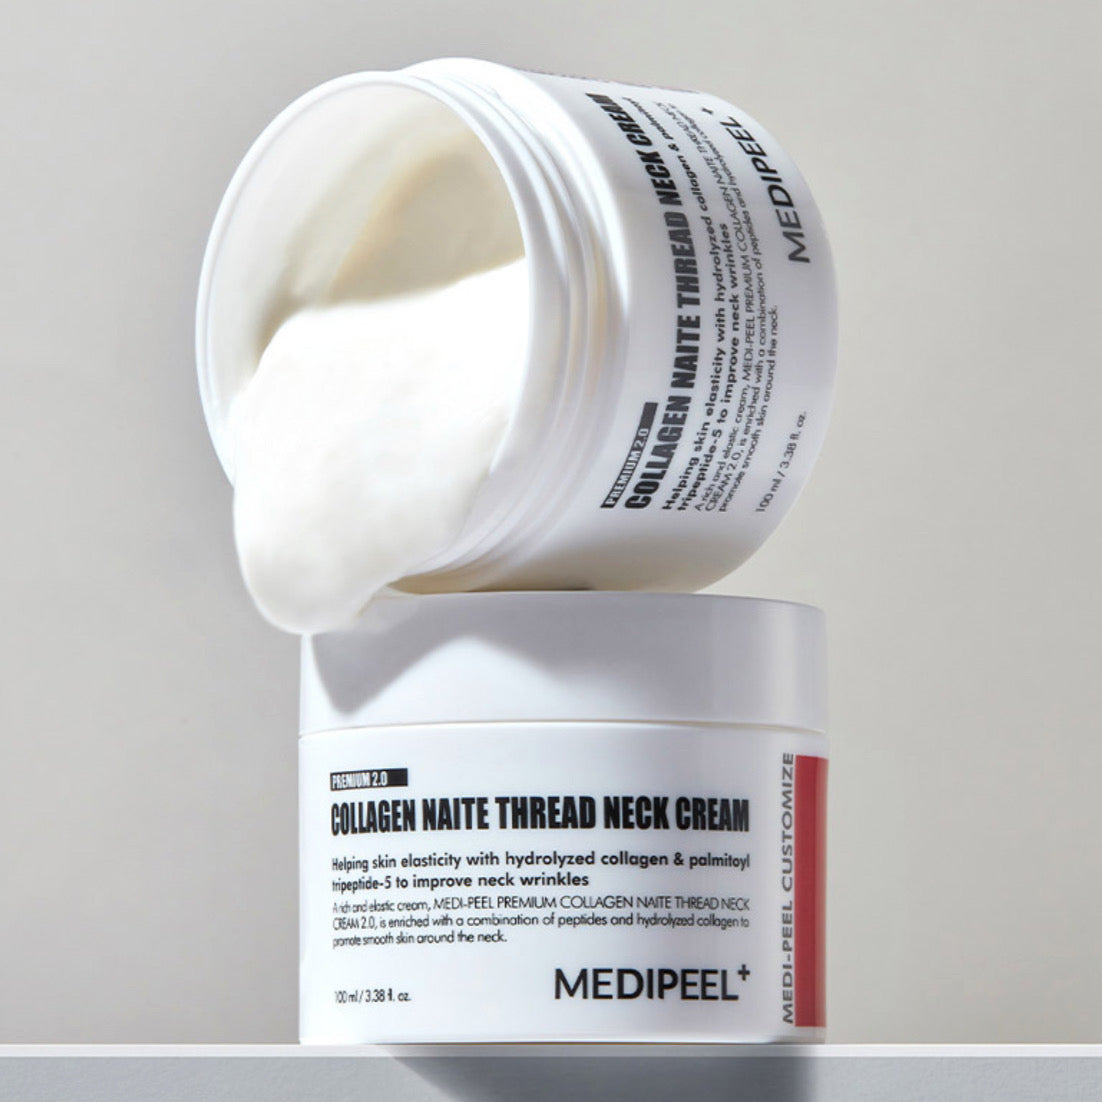 Neck and décolleté cream with Collagen Threads (updated formula!) by Medi-peel